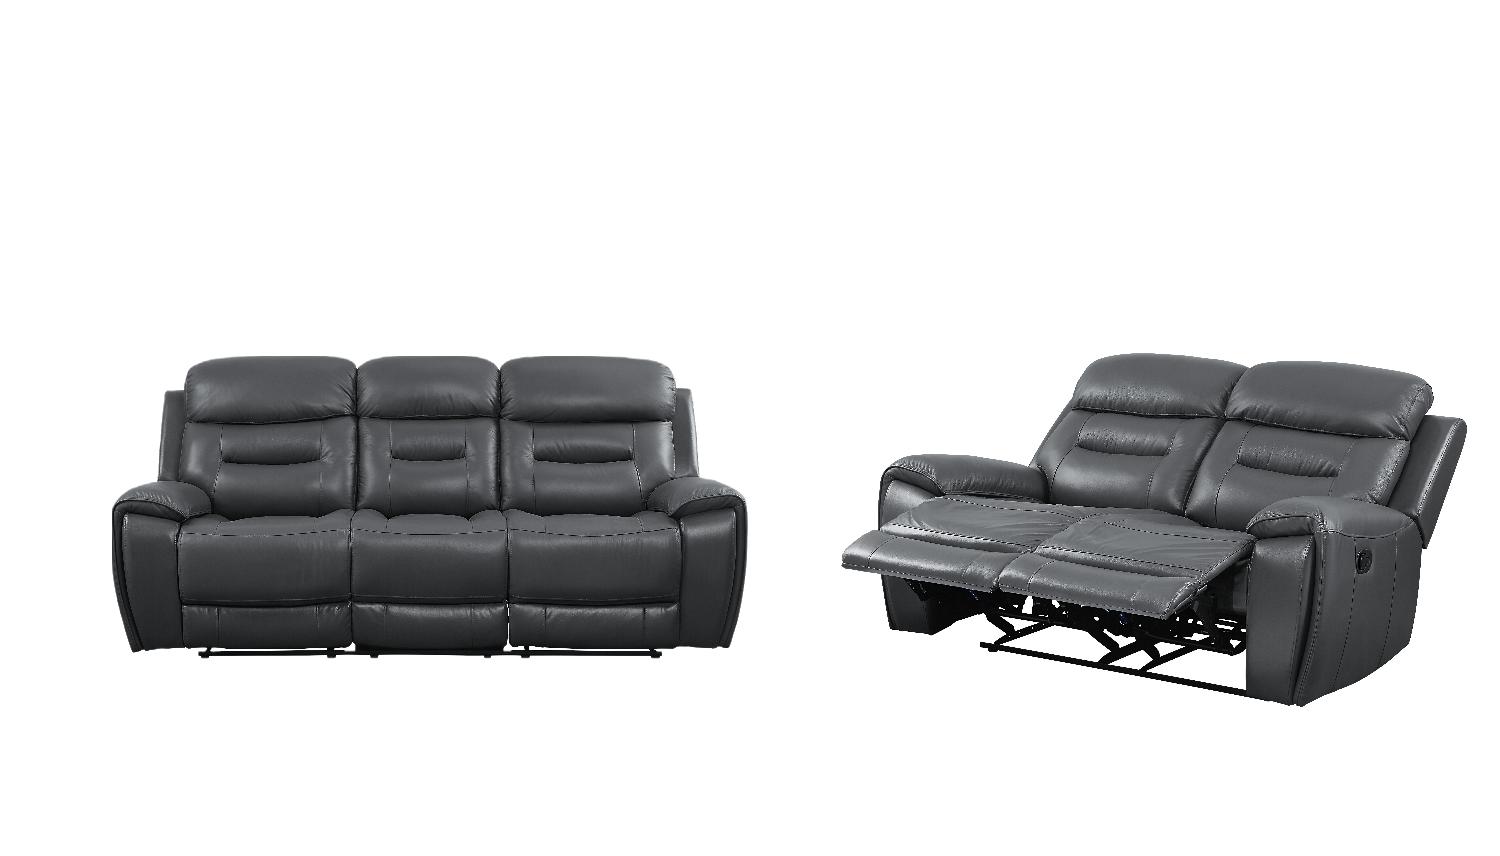 Contemporary Sofa and Loveseat Set Lamruil LV00072-2pcs in Gray Top grain leather